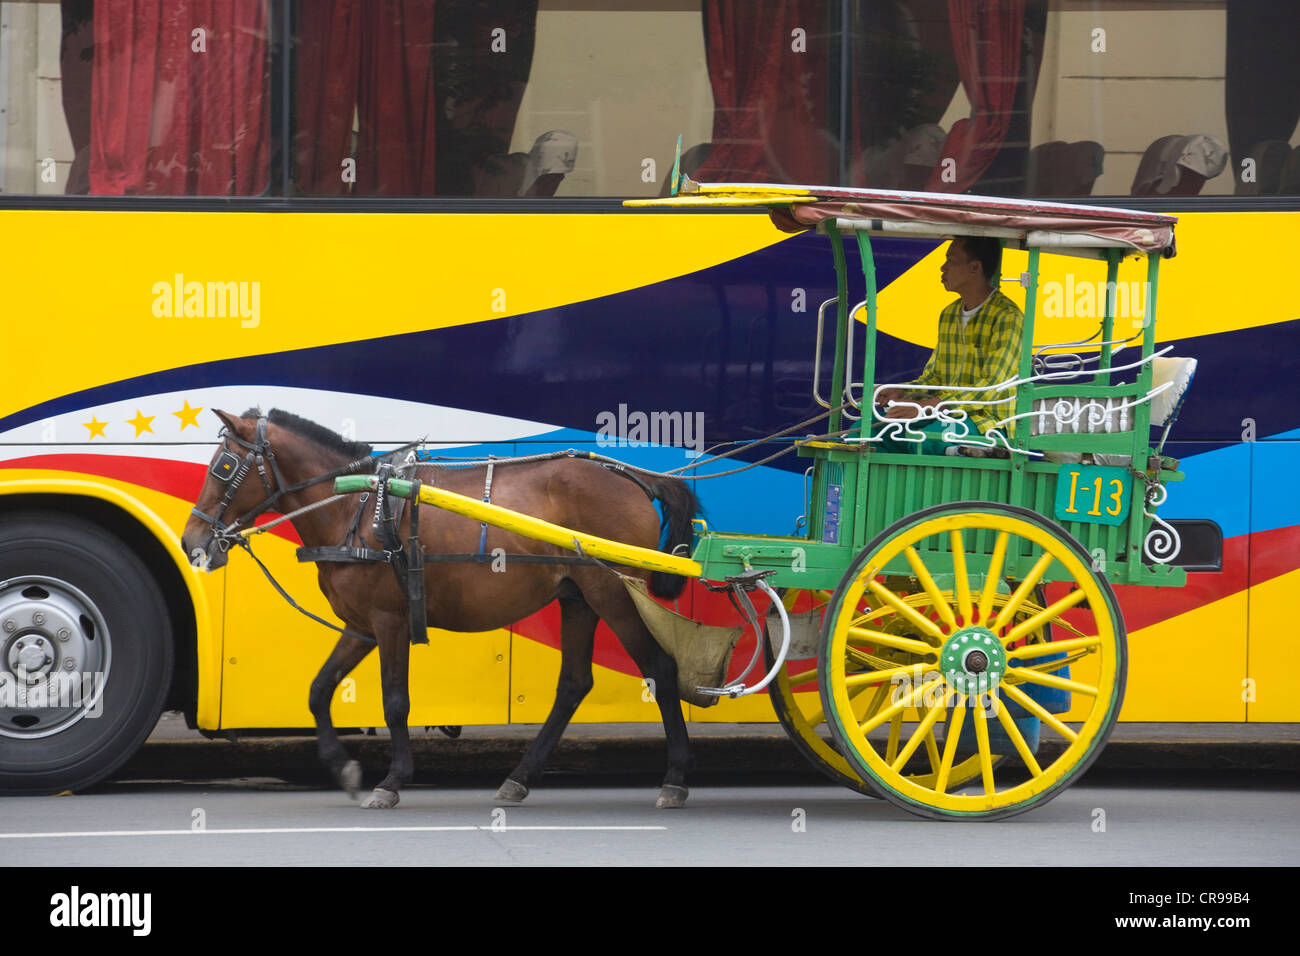 Horse cart walk by colorfully painted bus, Manila, Philippines Stock Photo